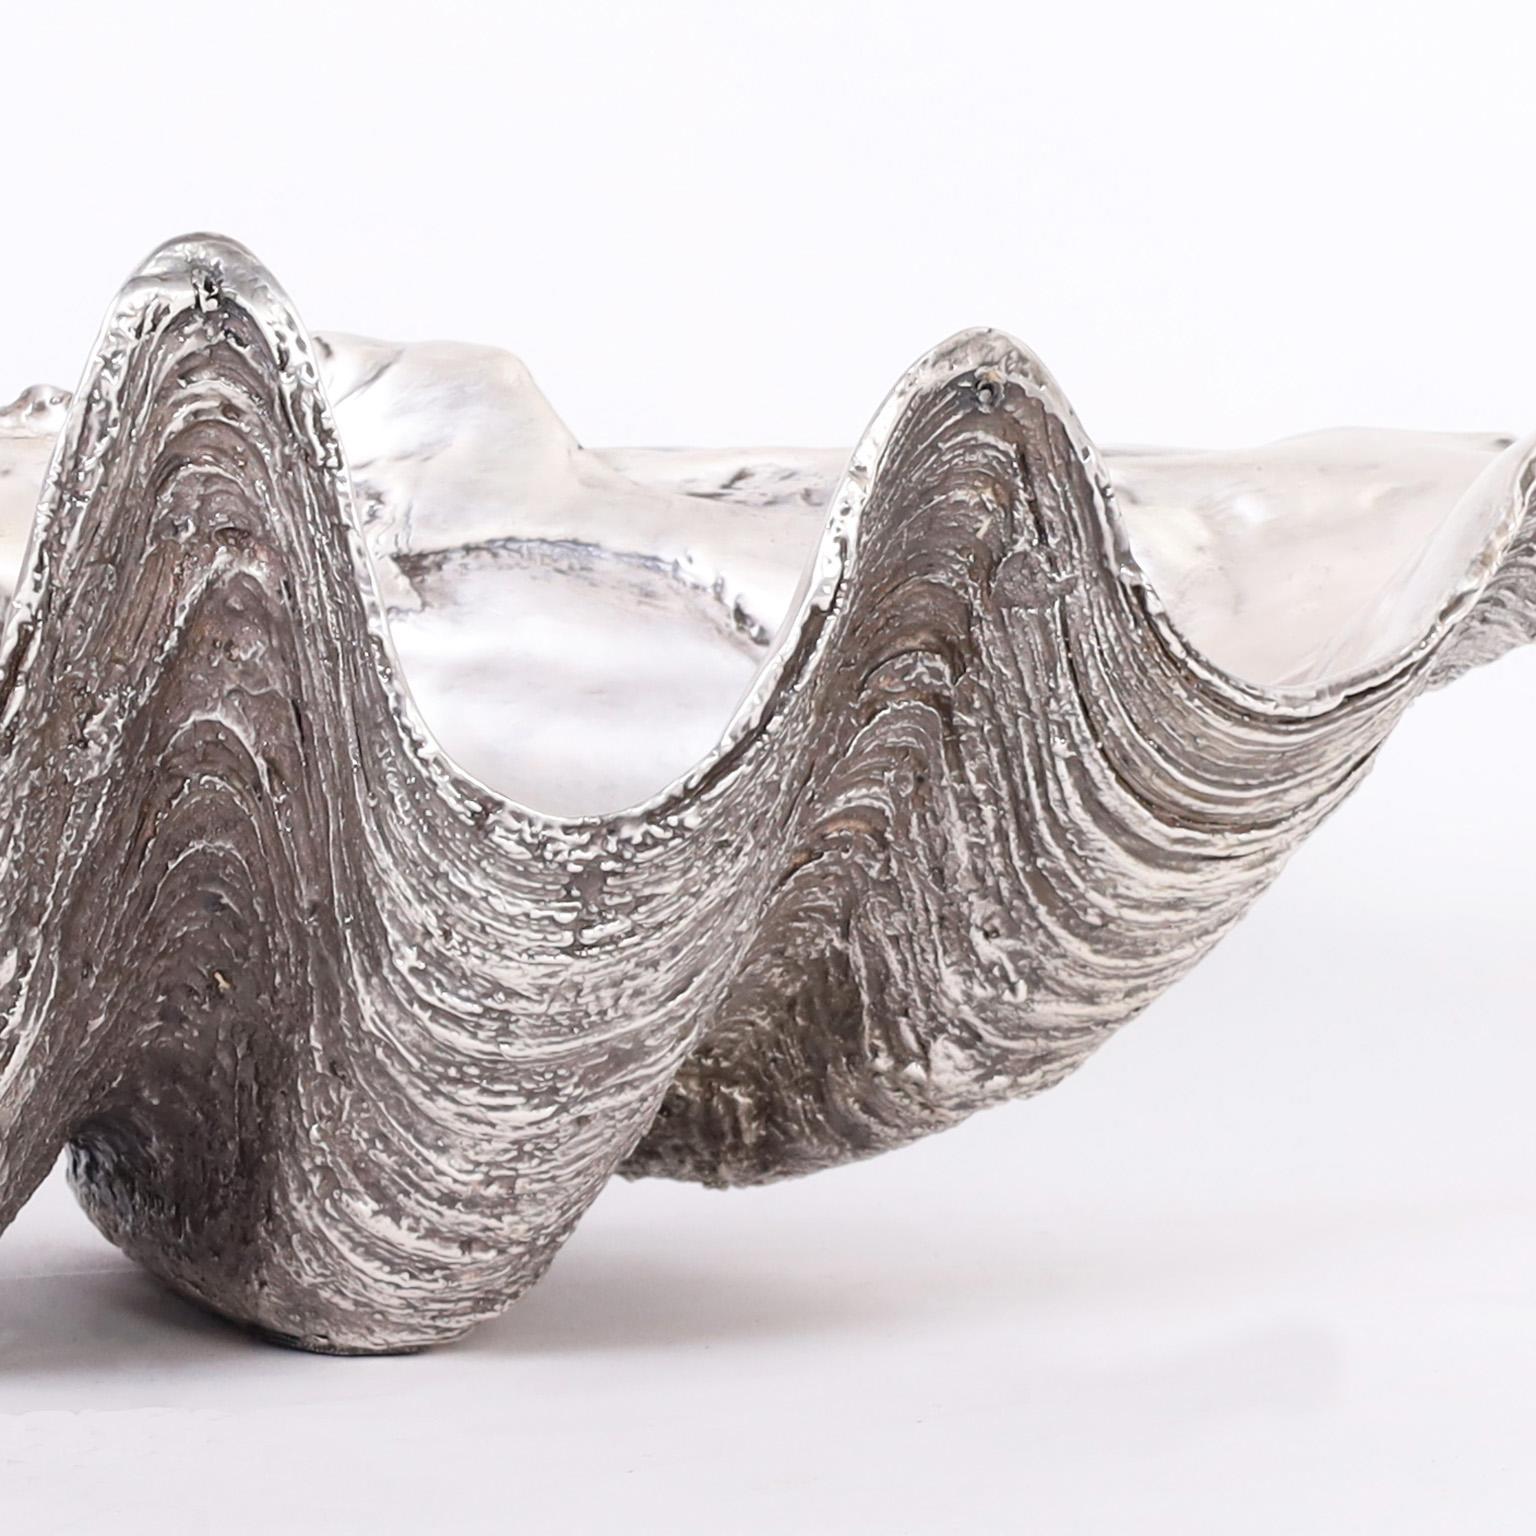 Mexican Silver Plate Life Size Giant Clam Shell Sculpture For Sale